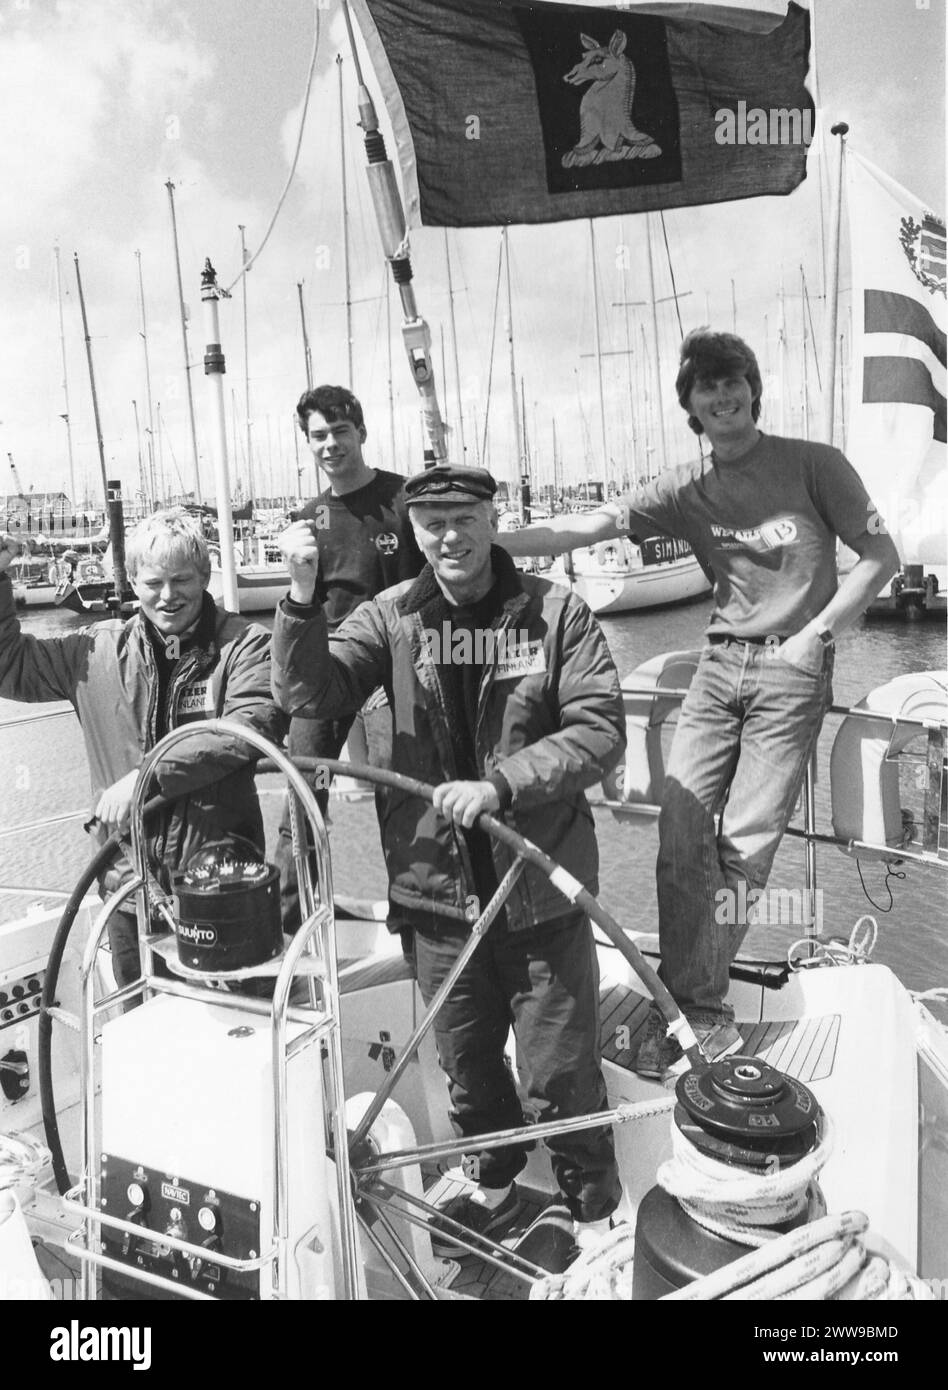 THE SKIPPER OF FAZER FINLAND MICHAEL BERNER, 2ND RIGHT, WITH MEMBERS OF HIS CREW L TO RIGHT, BEN WREDE,ILPO NIKKARI AND MIKA SAKSELA AFTER RETURNING TO PORTSMOUTH AT THE END OF THE WHITBREAD ROUND THE YACHT RACE 1990. PIC MIKE WALKER 1990 Stock Photo